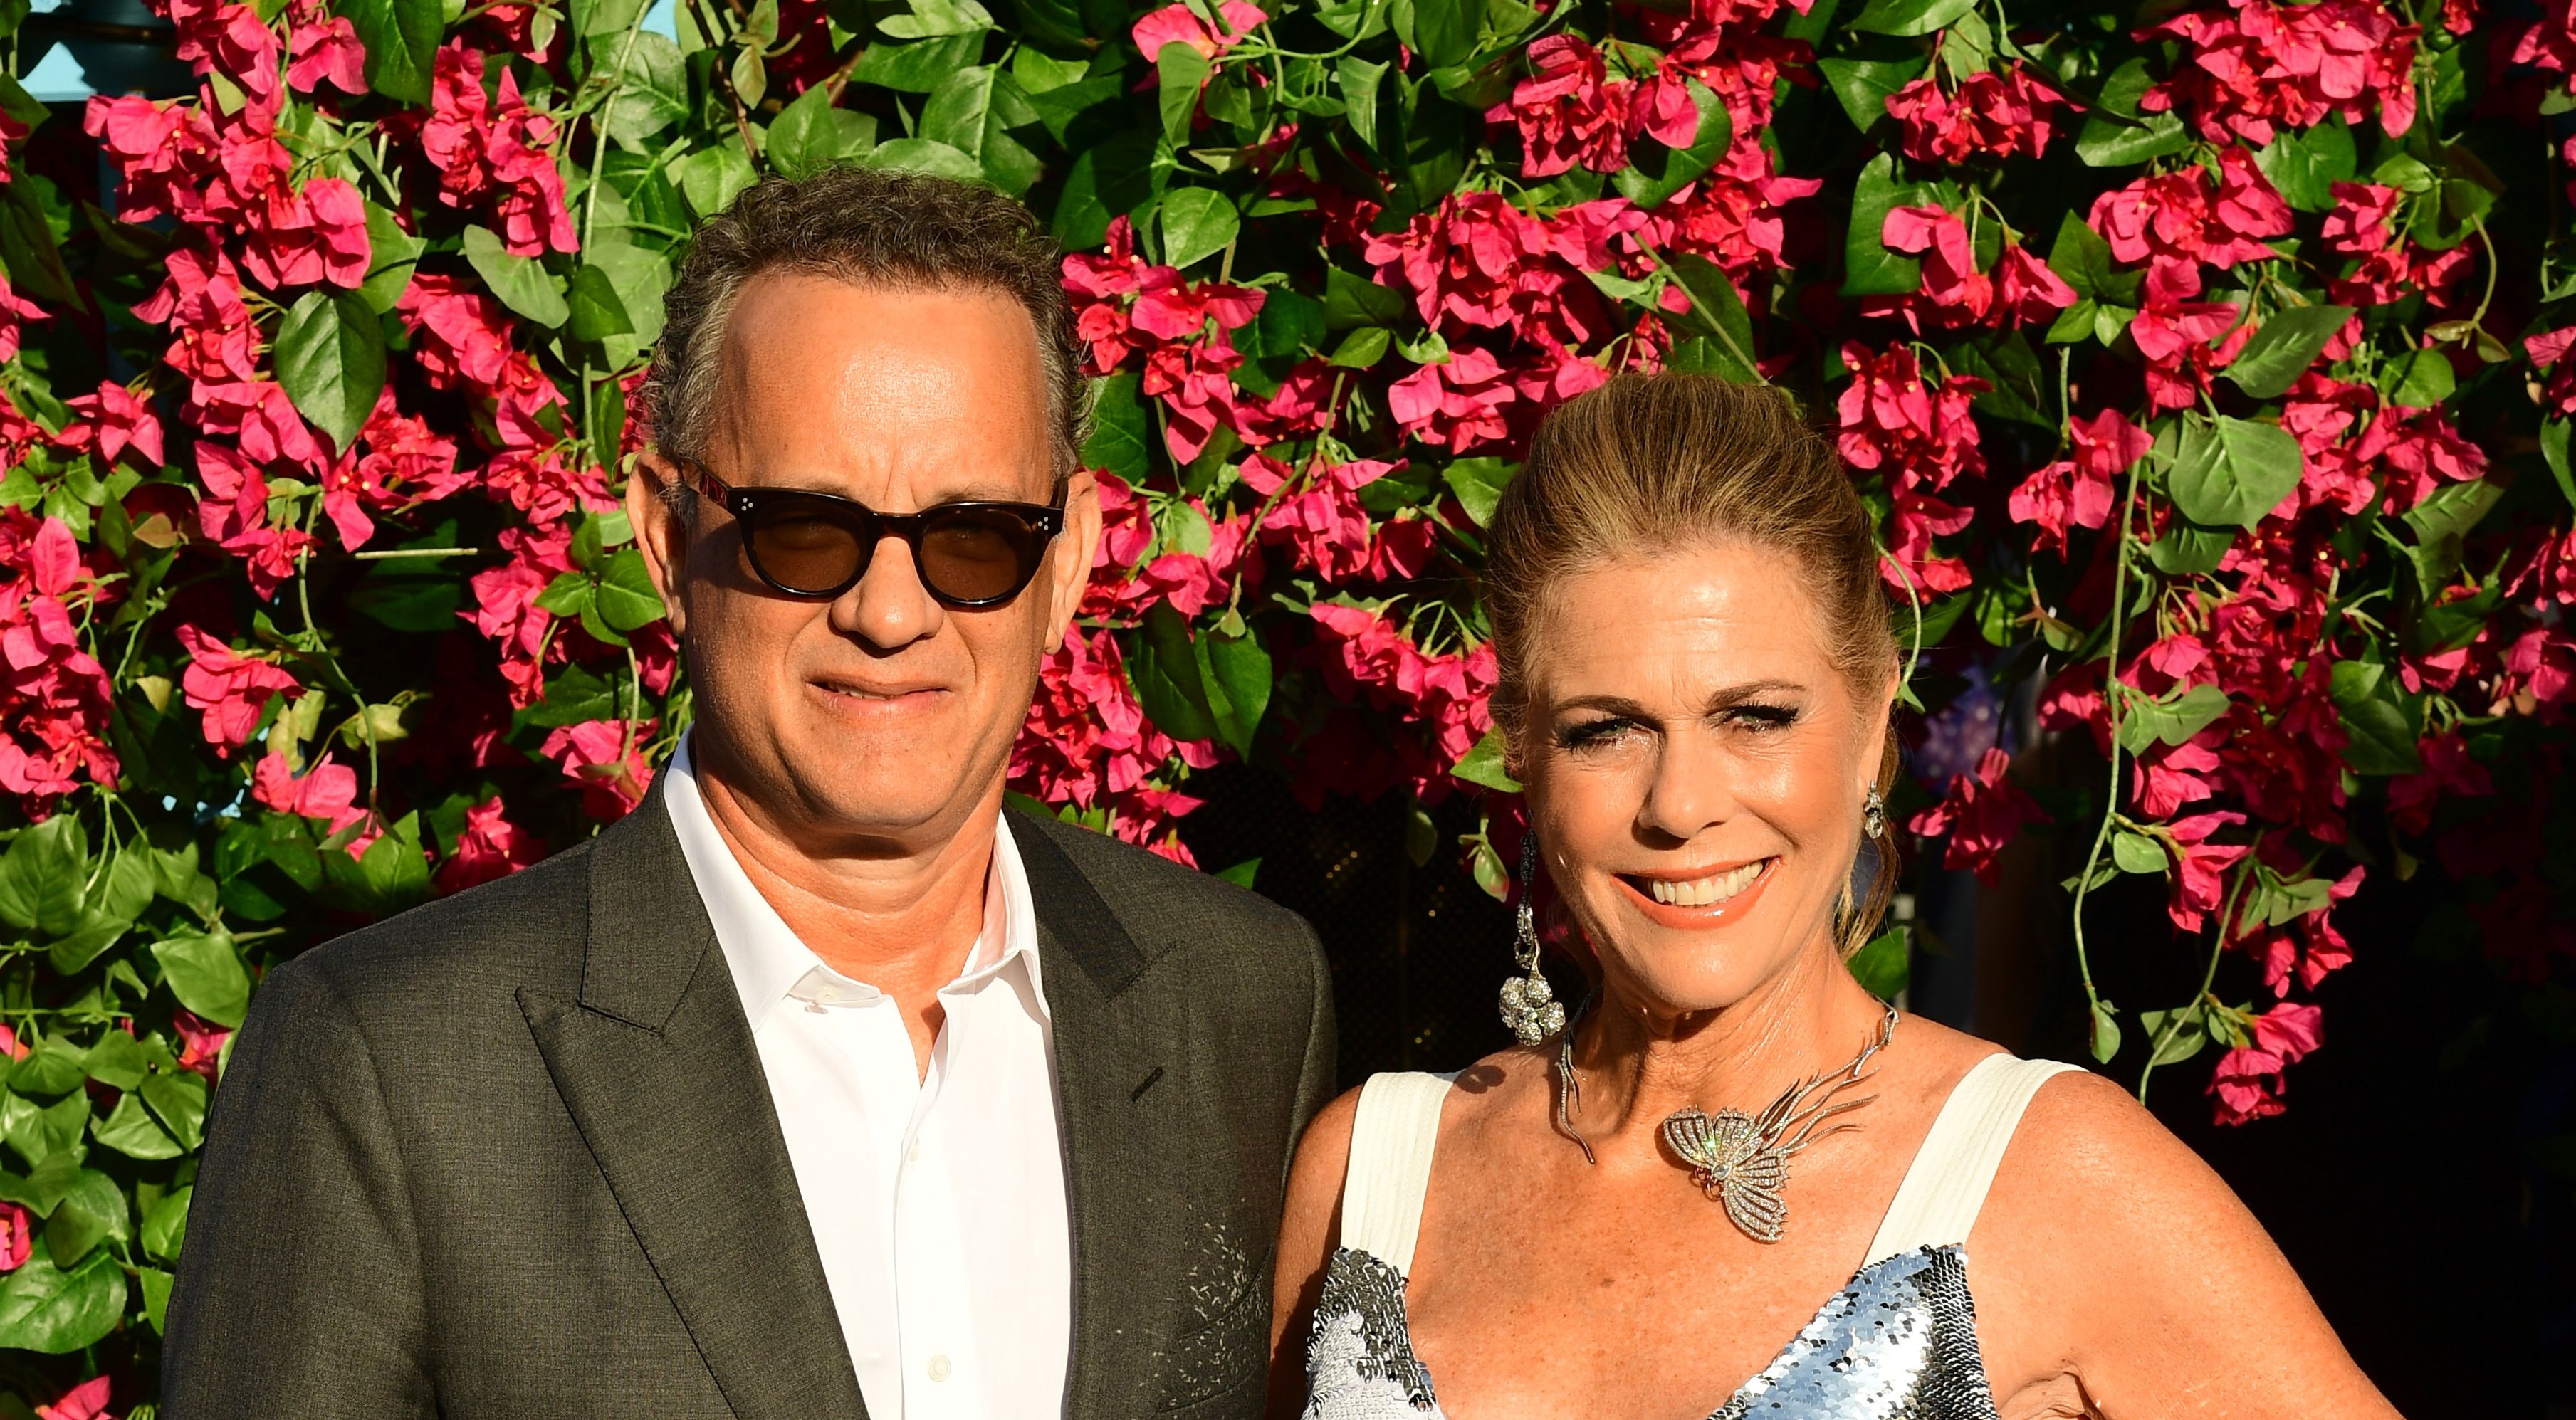 Rita Wilson reveals what she told husband Tom Hanks after breast